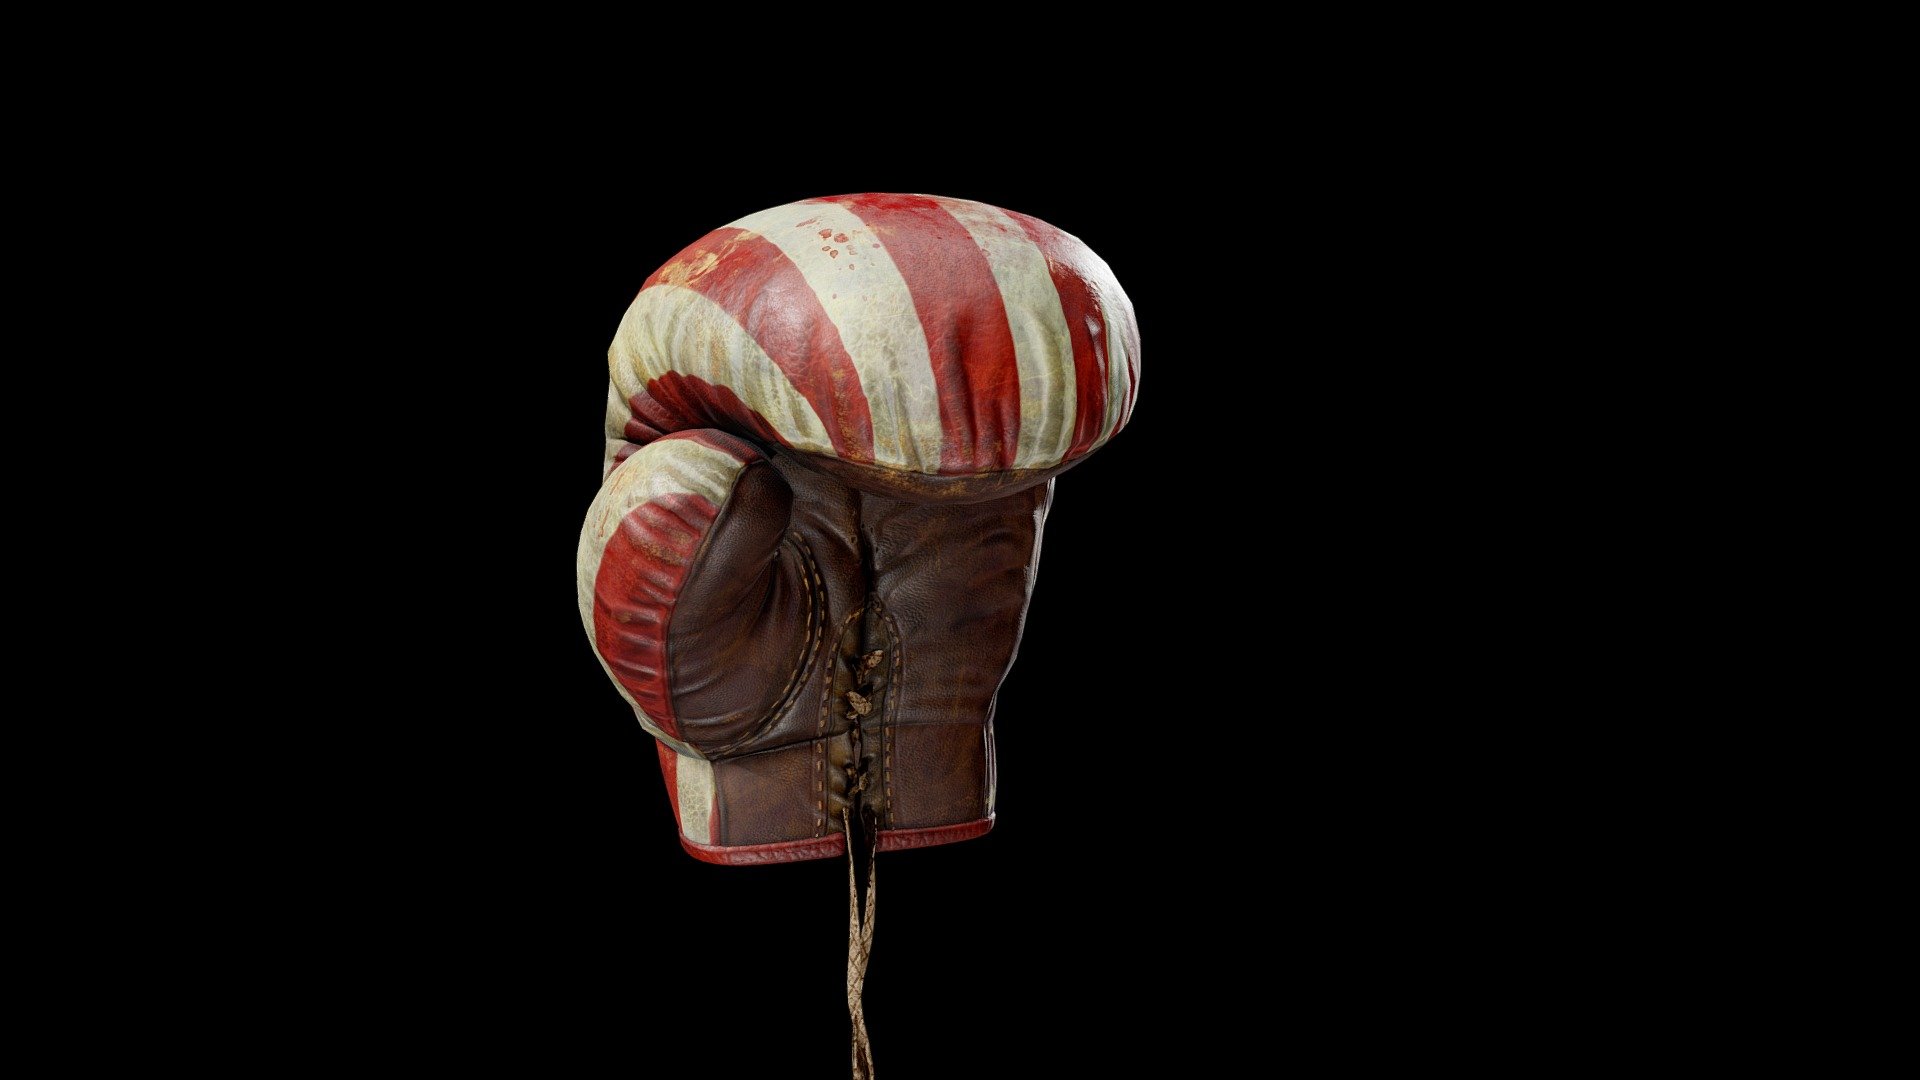 Boxing glove prop made gameready 3d model